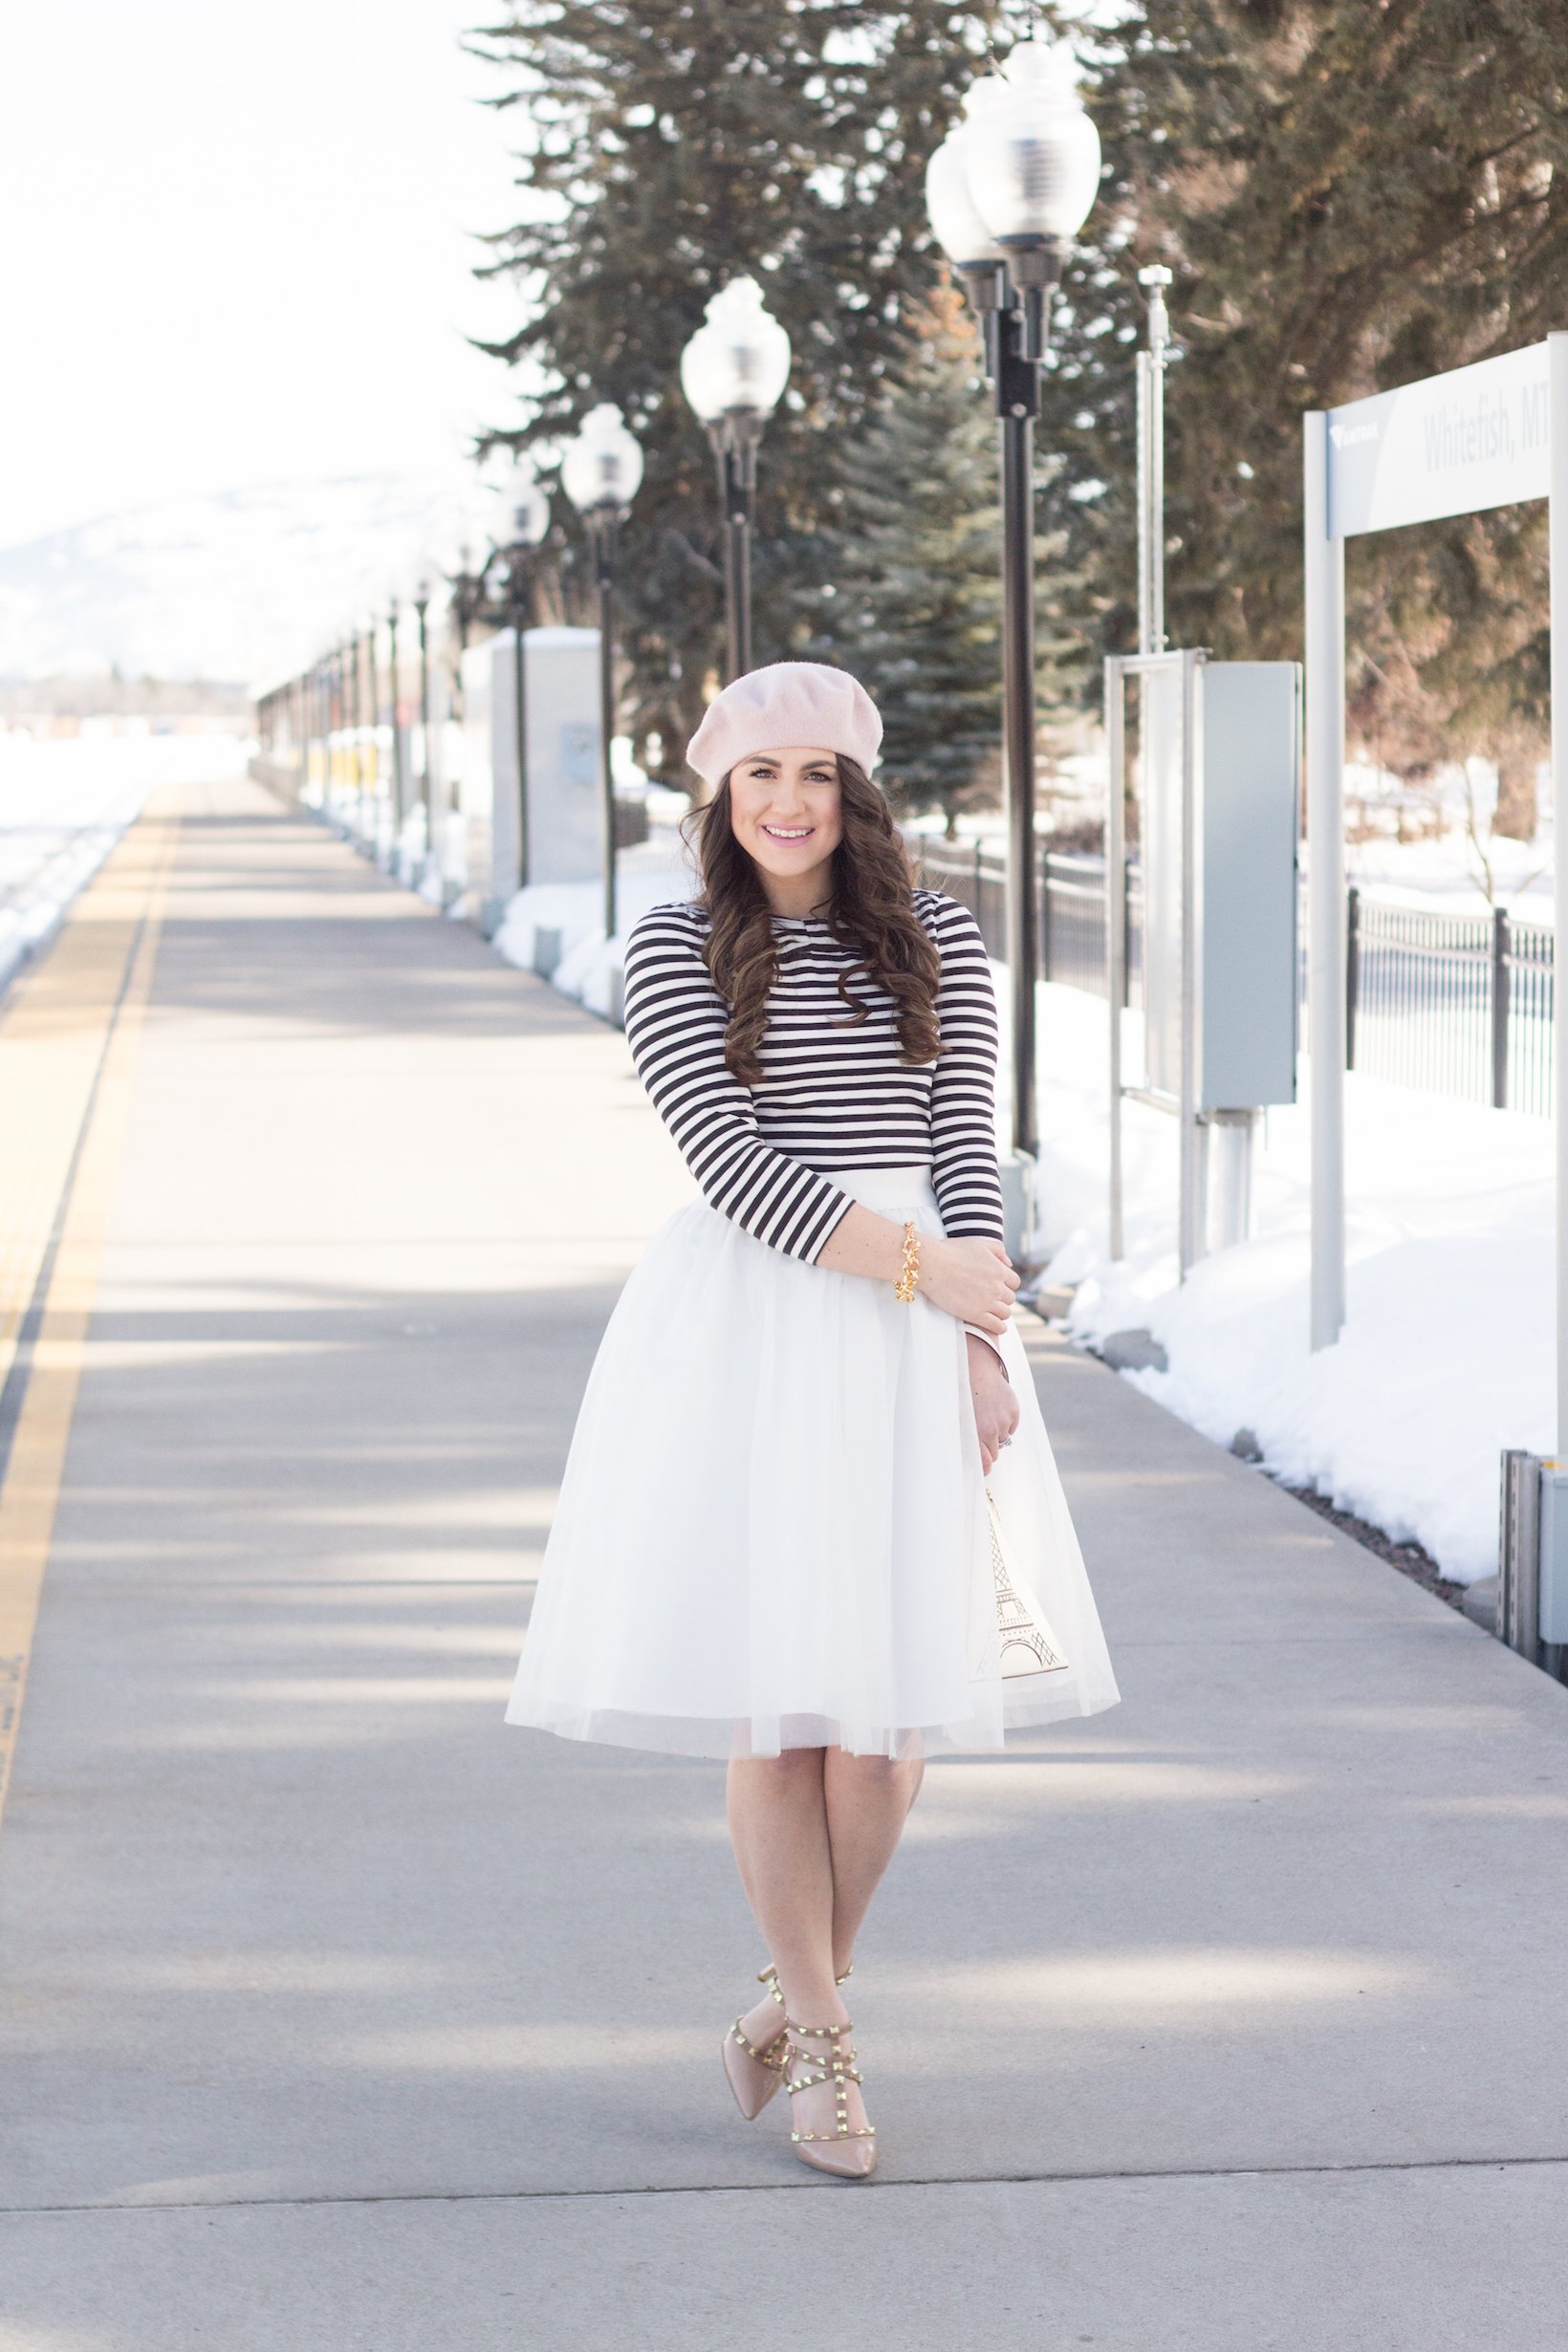 Trying out the best Parisian flair with a tulle skirt and beret.